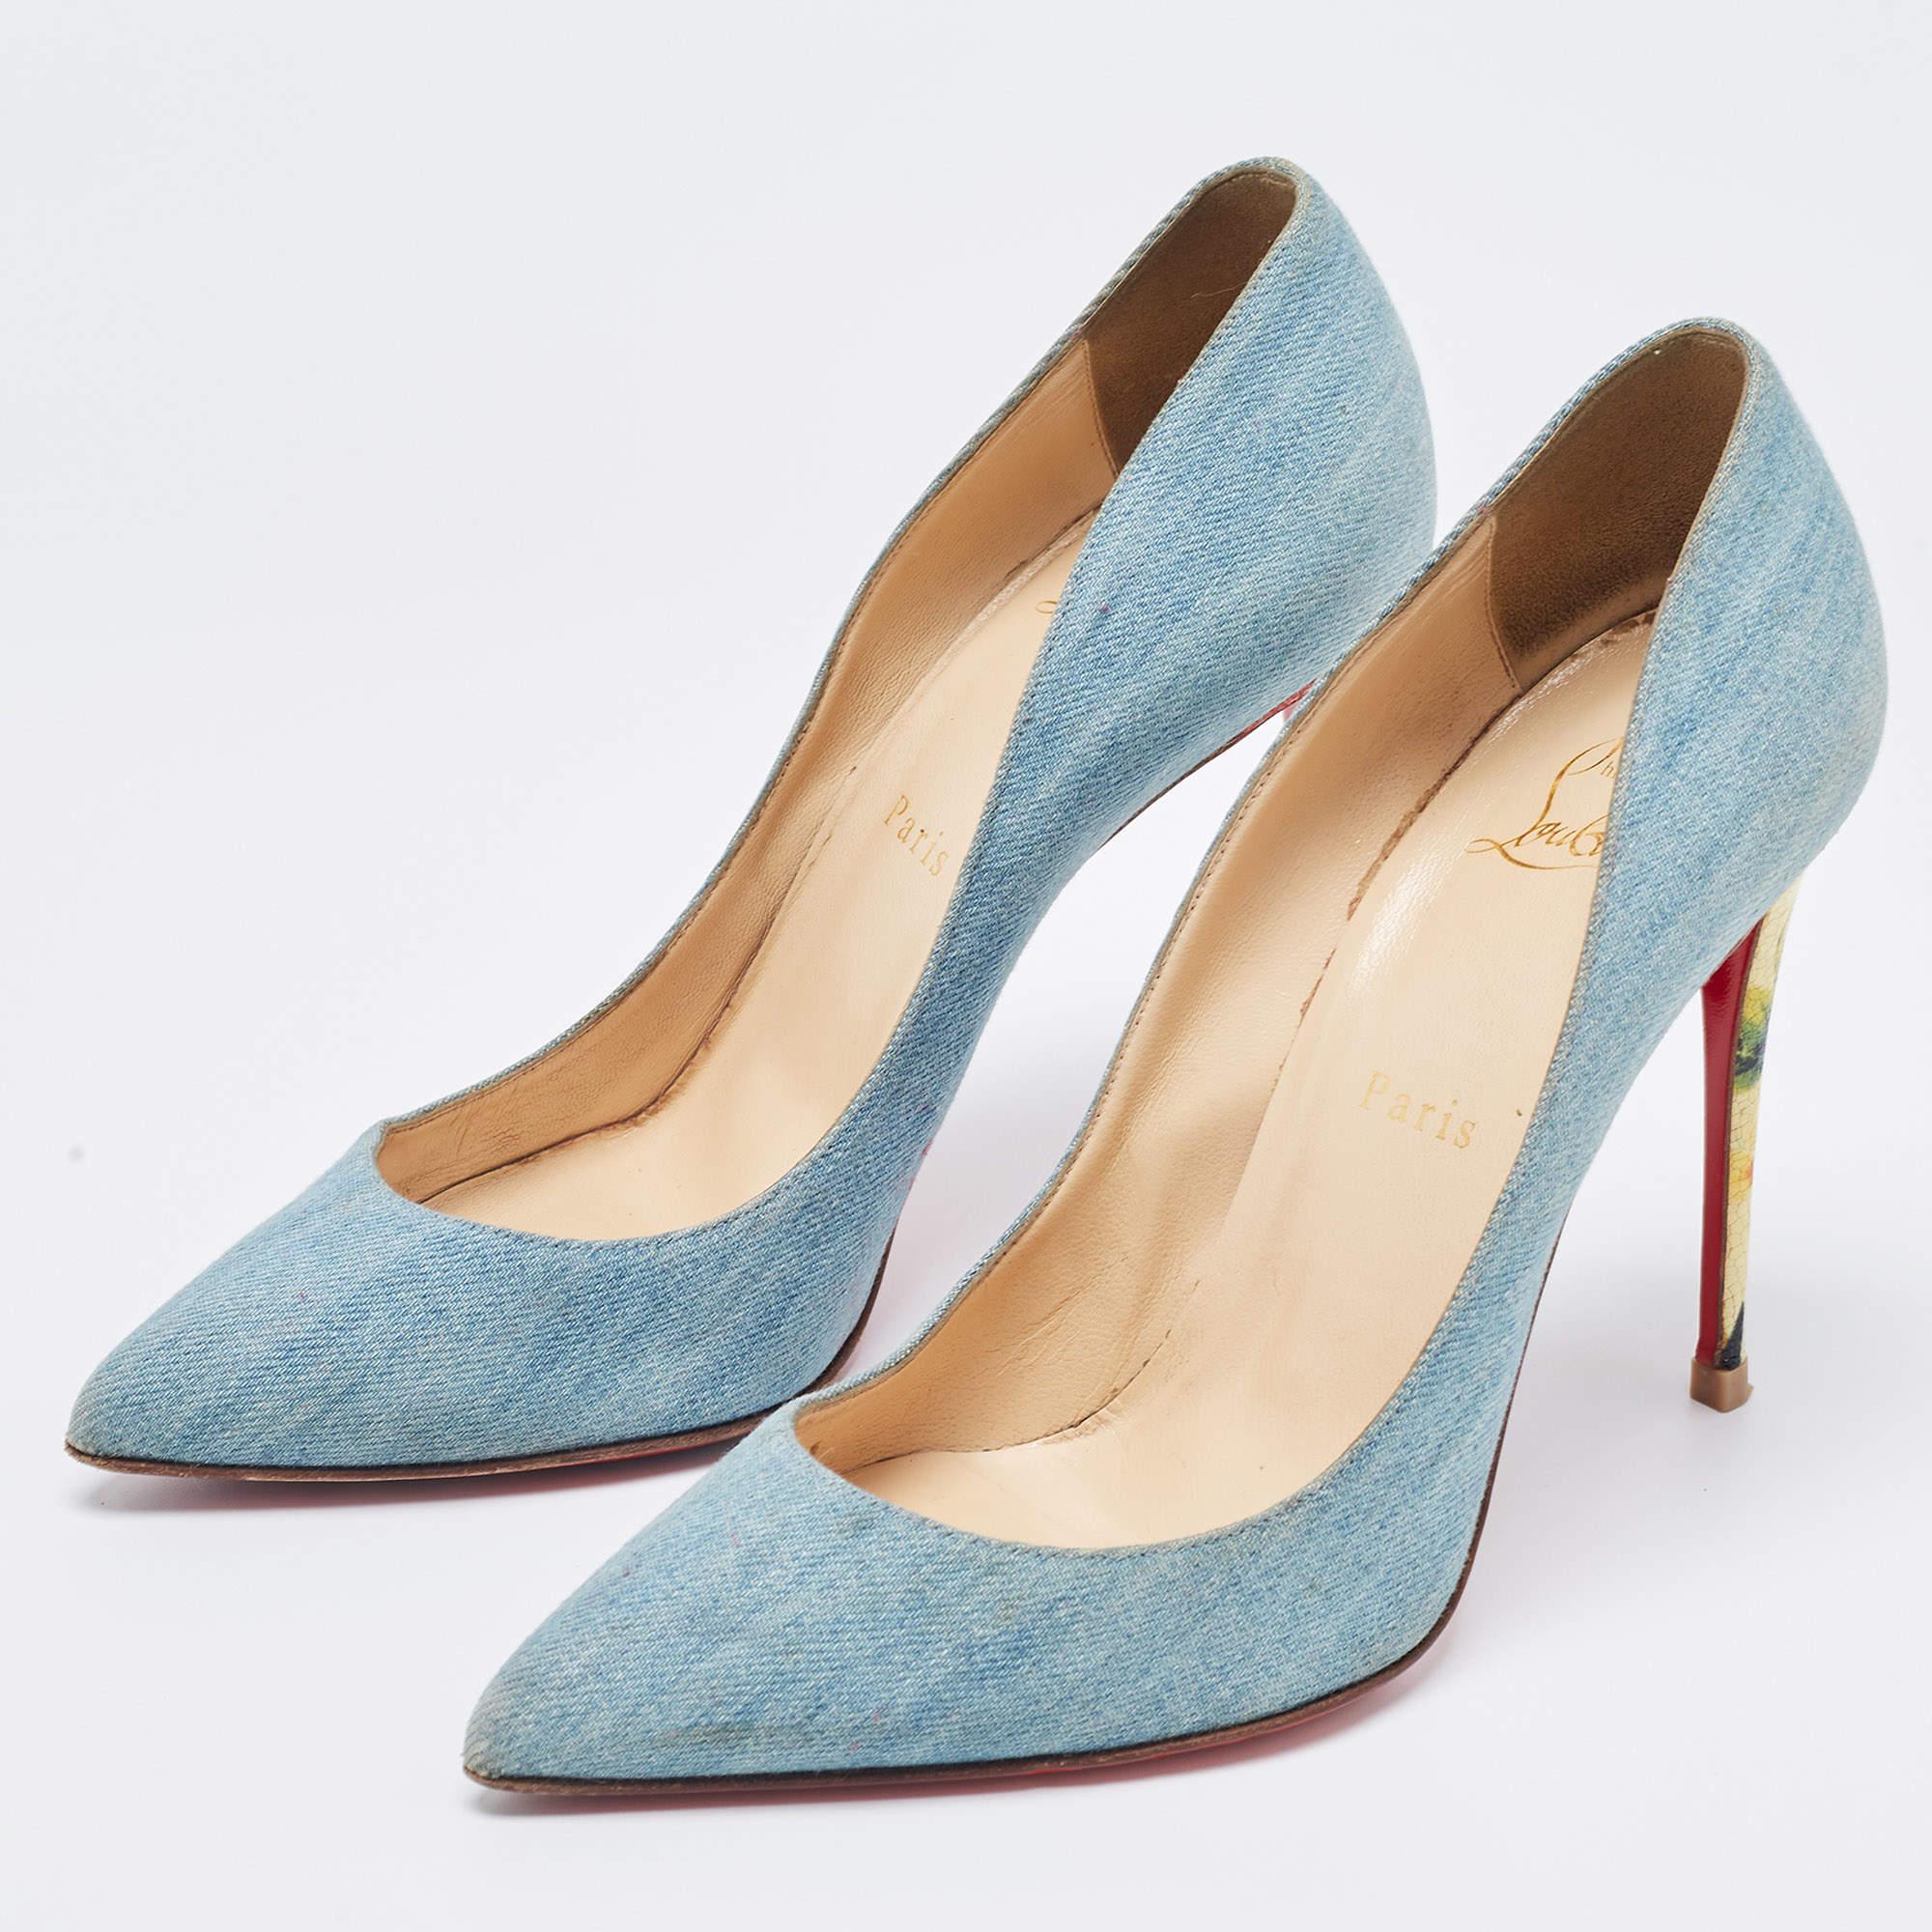 Named after British supermodel Kate Moss, this pair of Kate pumps from Christian Louboutin exemplifies luxury and femininity. It has been made using blue denim into a sleek silhouette and flaunts pointed toe, 11cm heels, and precise cut vamps. The